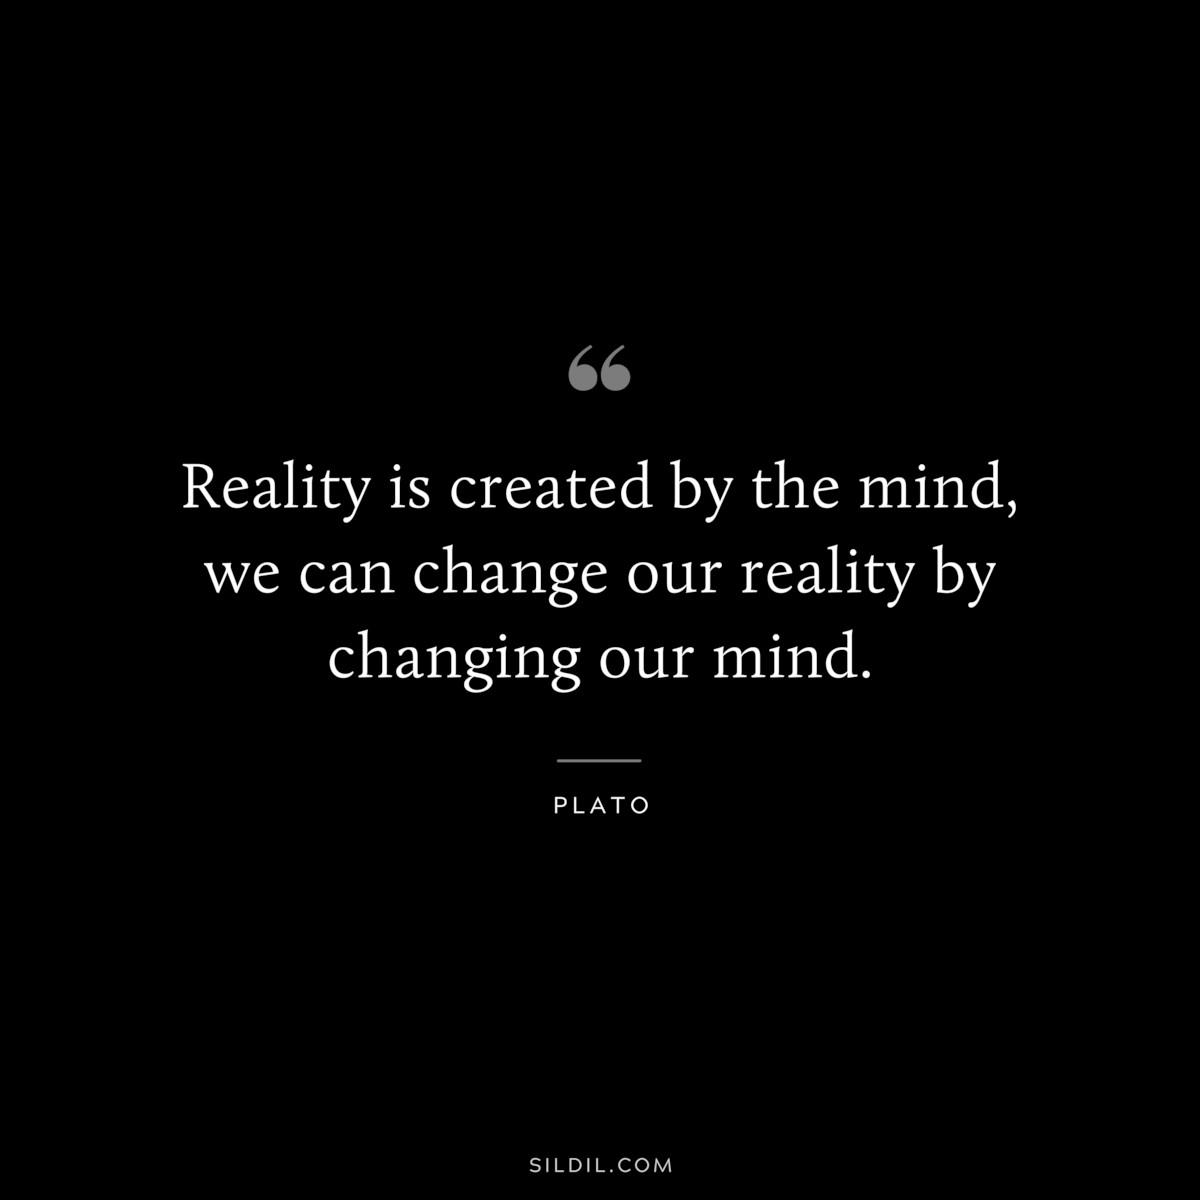 Reality is created by the mind, we can change our reality by changing our mind. ― Plato